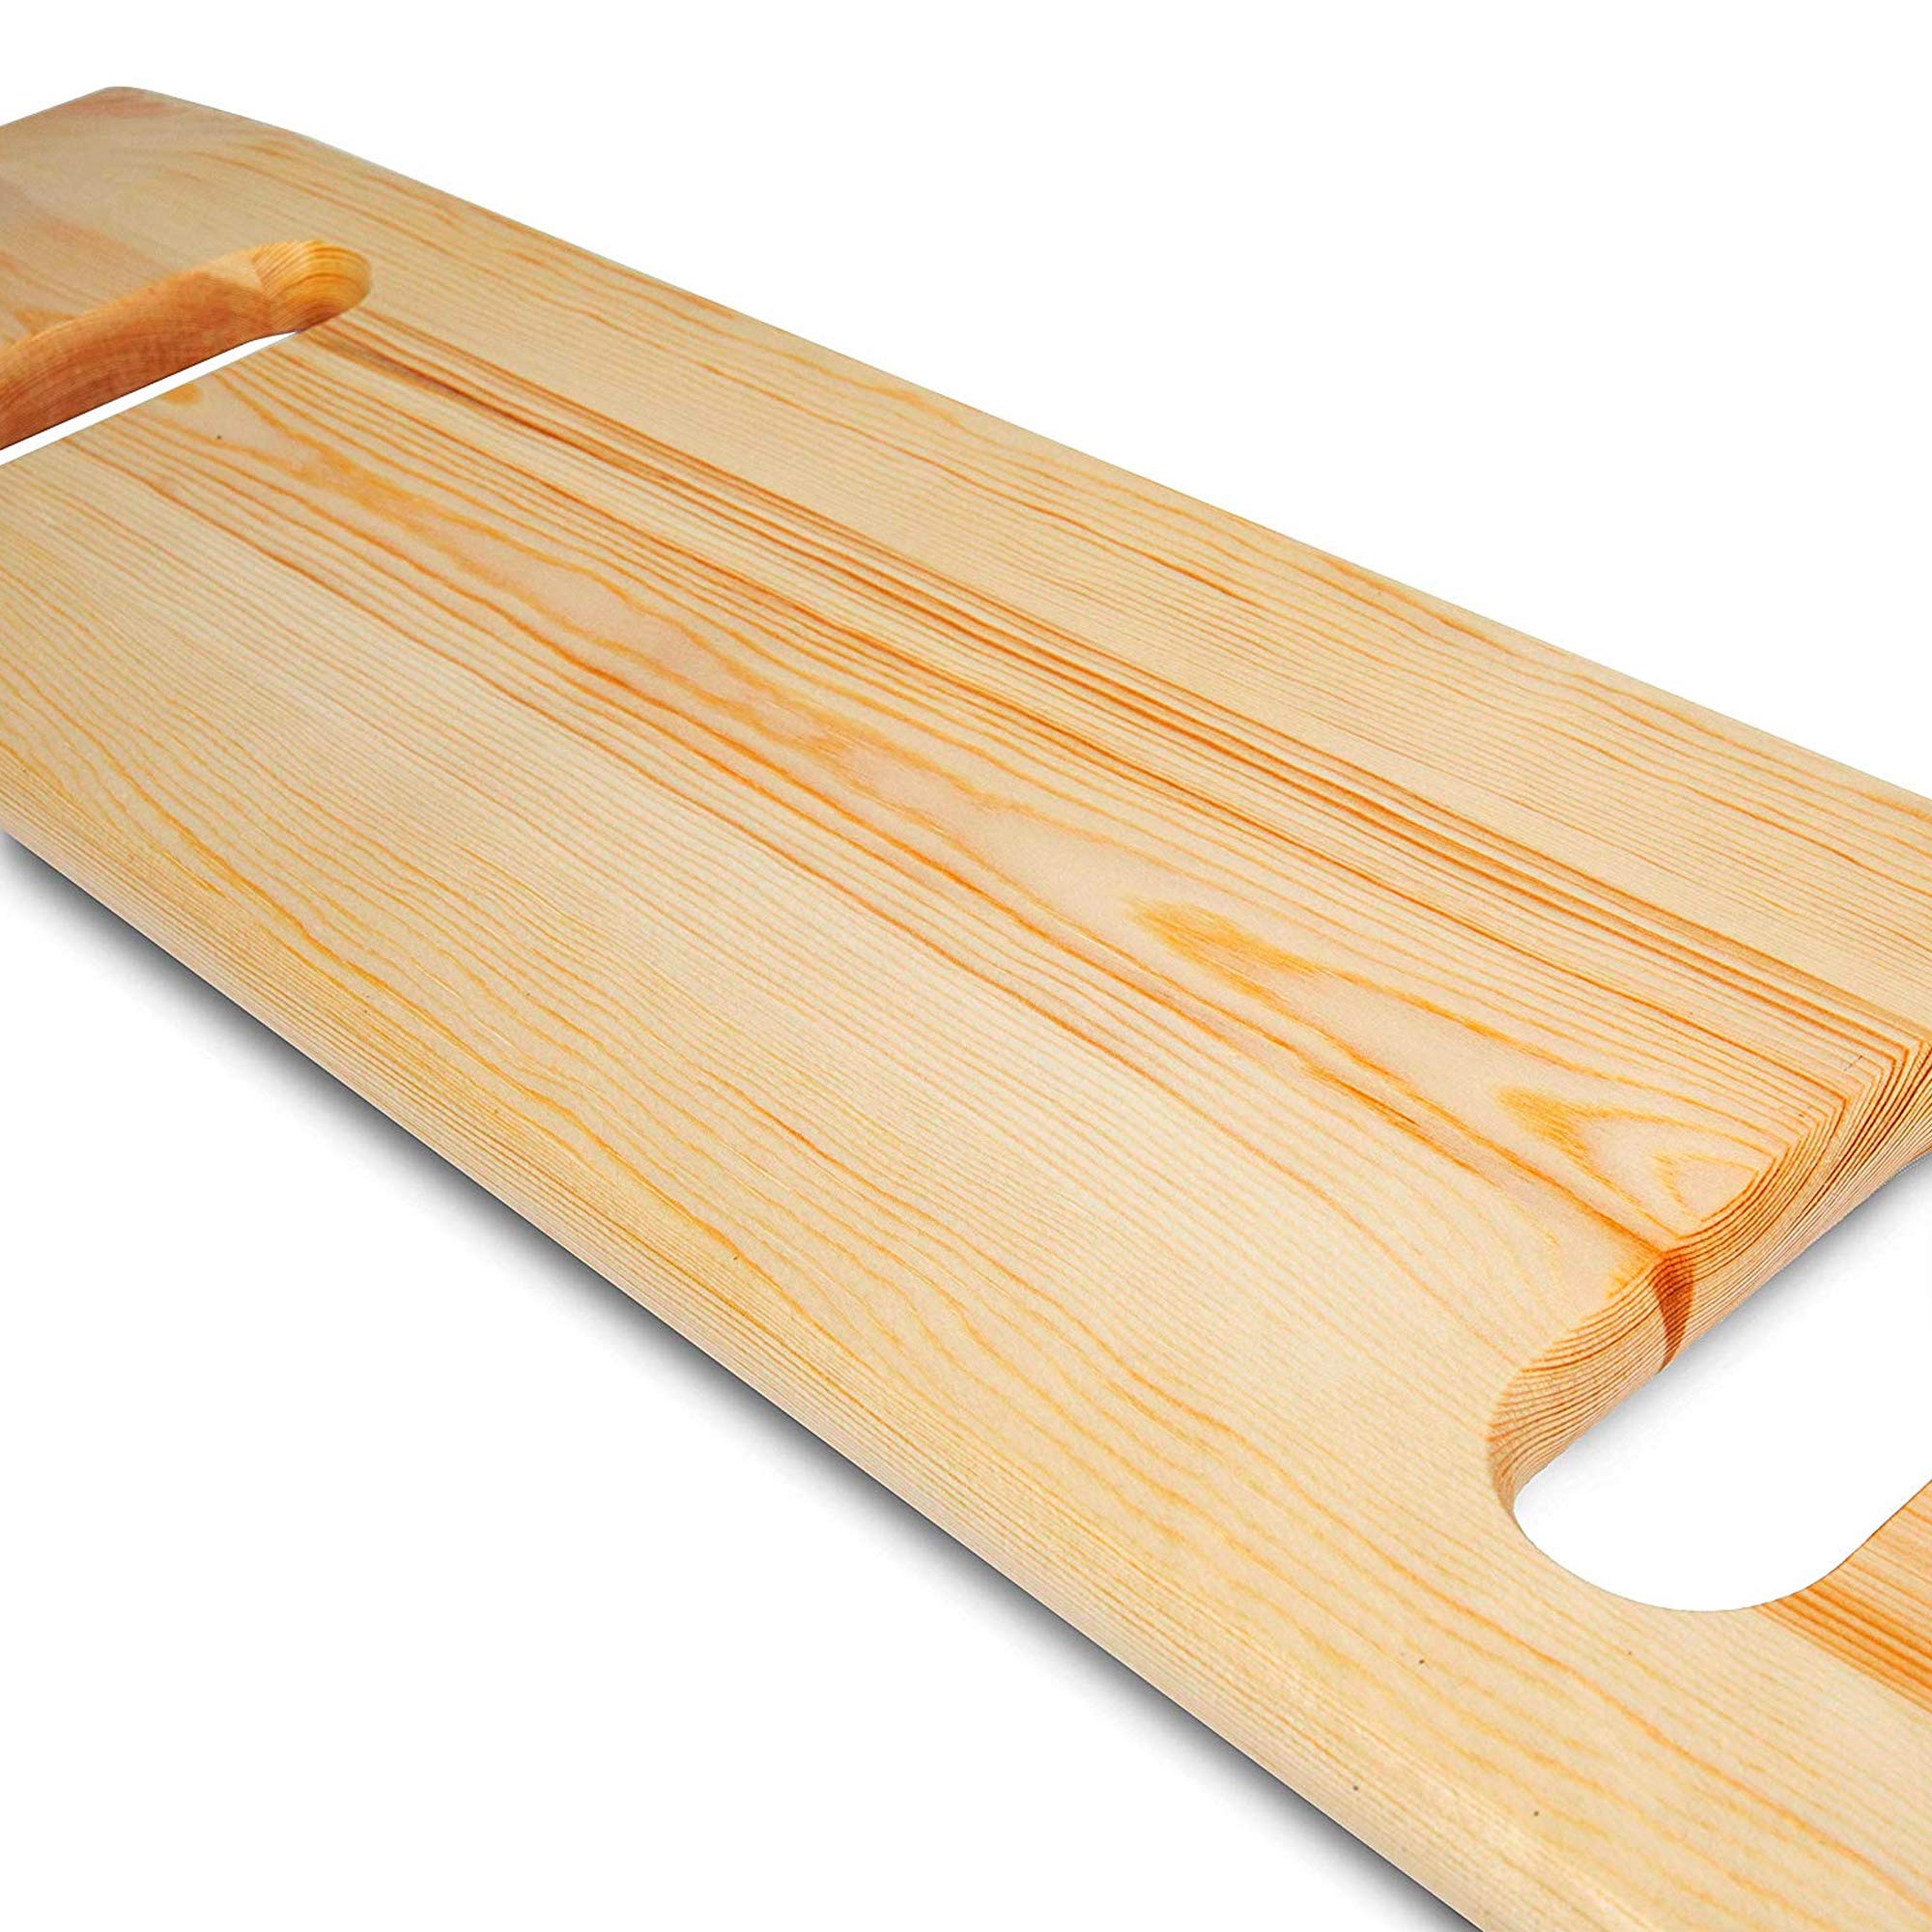 DMI Transfer Board made of Heavy-Duty Wood for Patient, Senior and Handicap Move Assist and Slide Transfers, Holds up to 440 Pounds, 2 Cut out Handle, 24 x 8 x 1